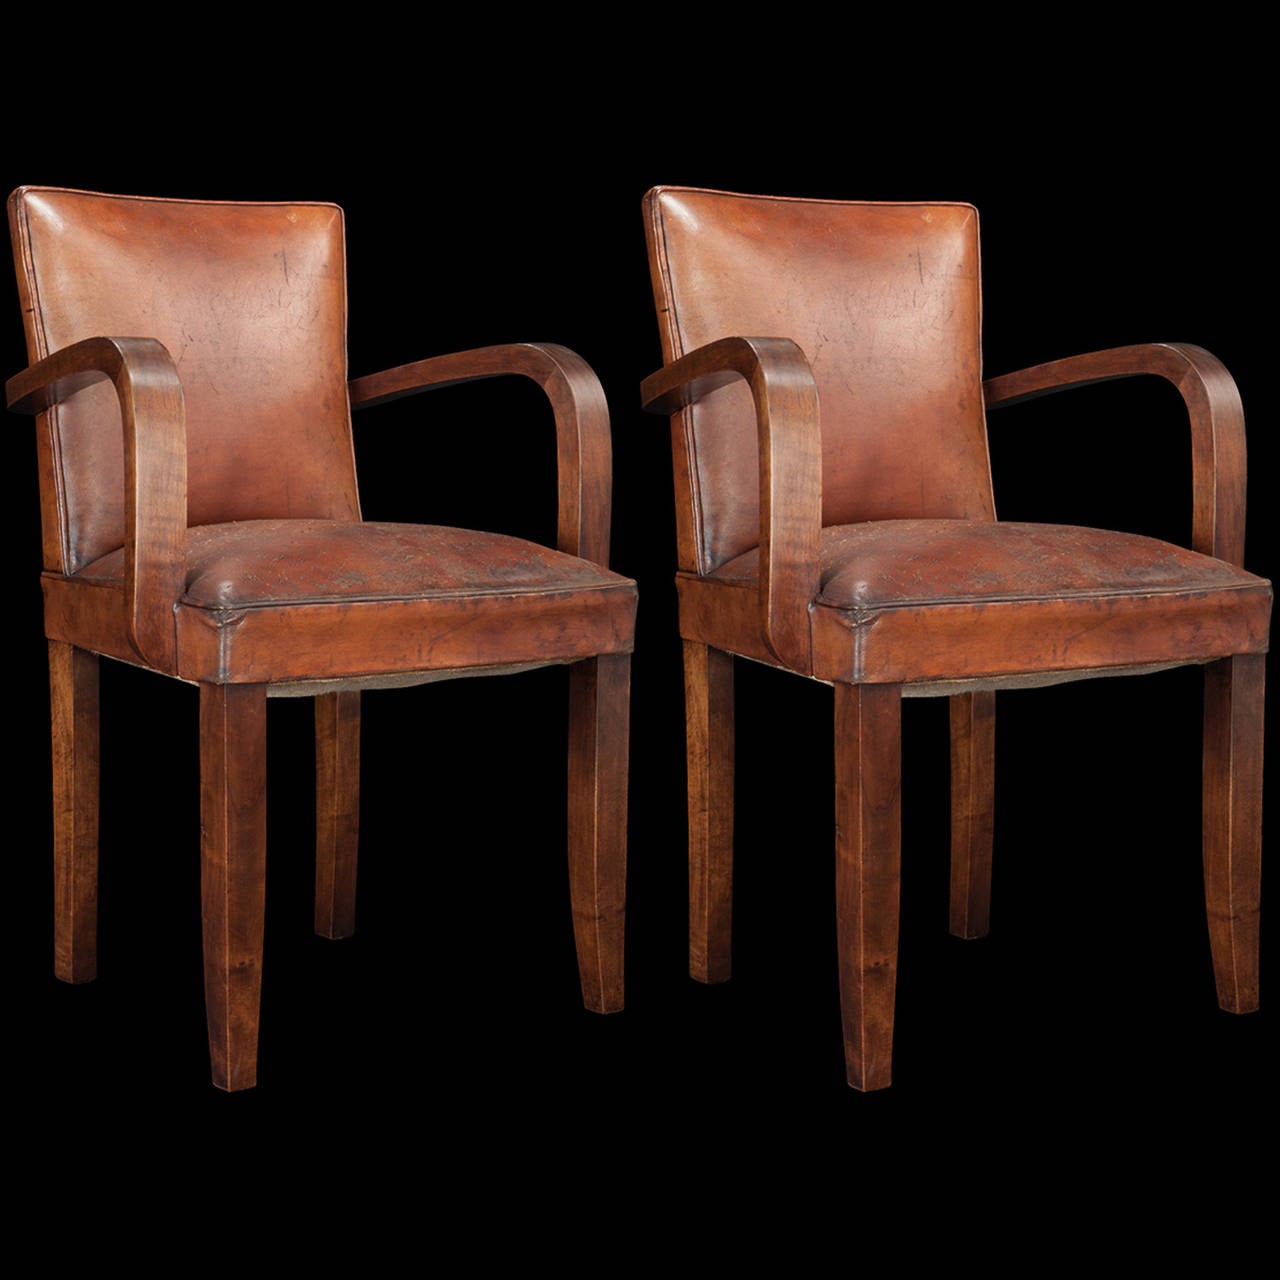 Bentwood arms and original leather upholstery with handsome patina.